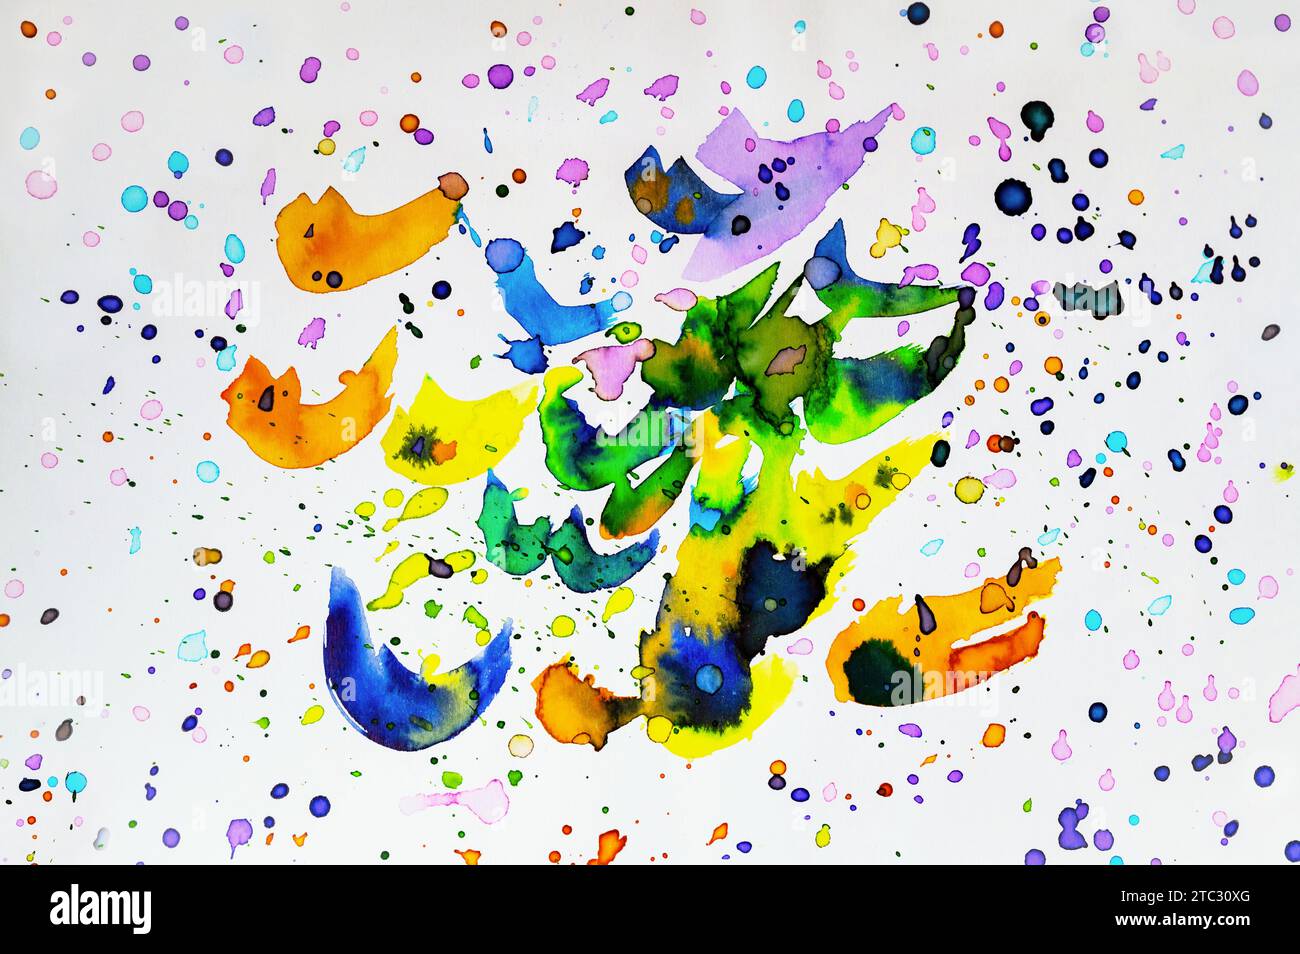 Many small and larger stains in fresh colors on white background. Watercolor painting, Stock Photo